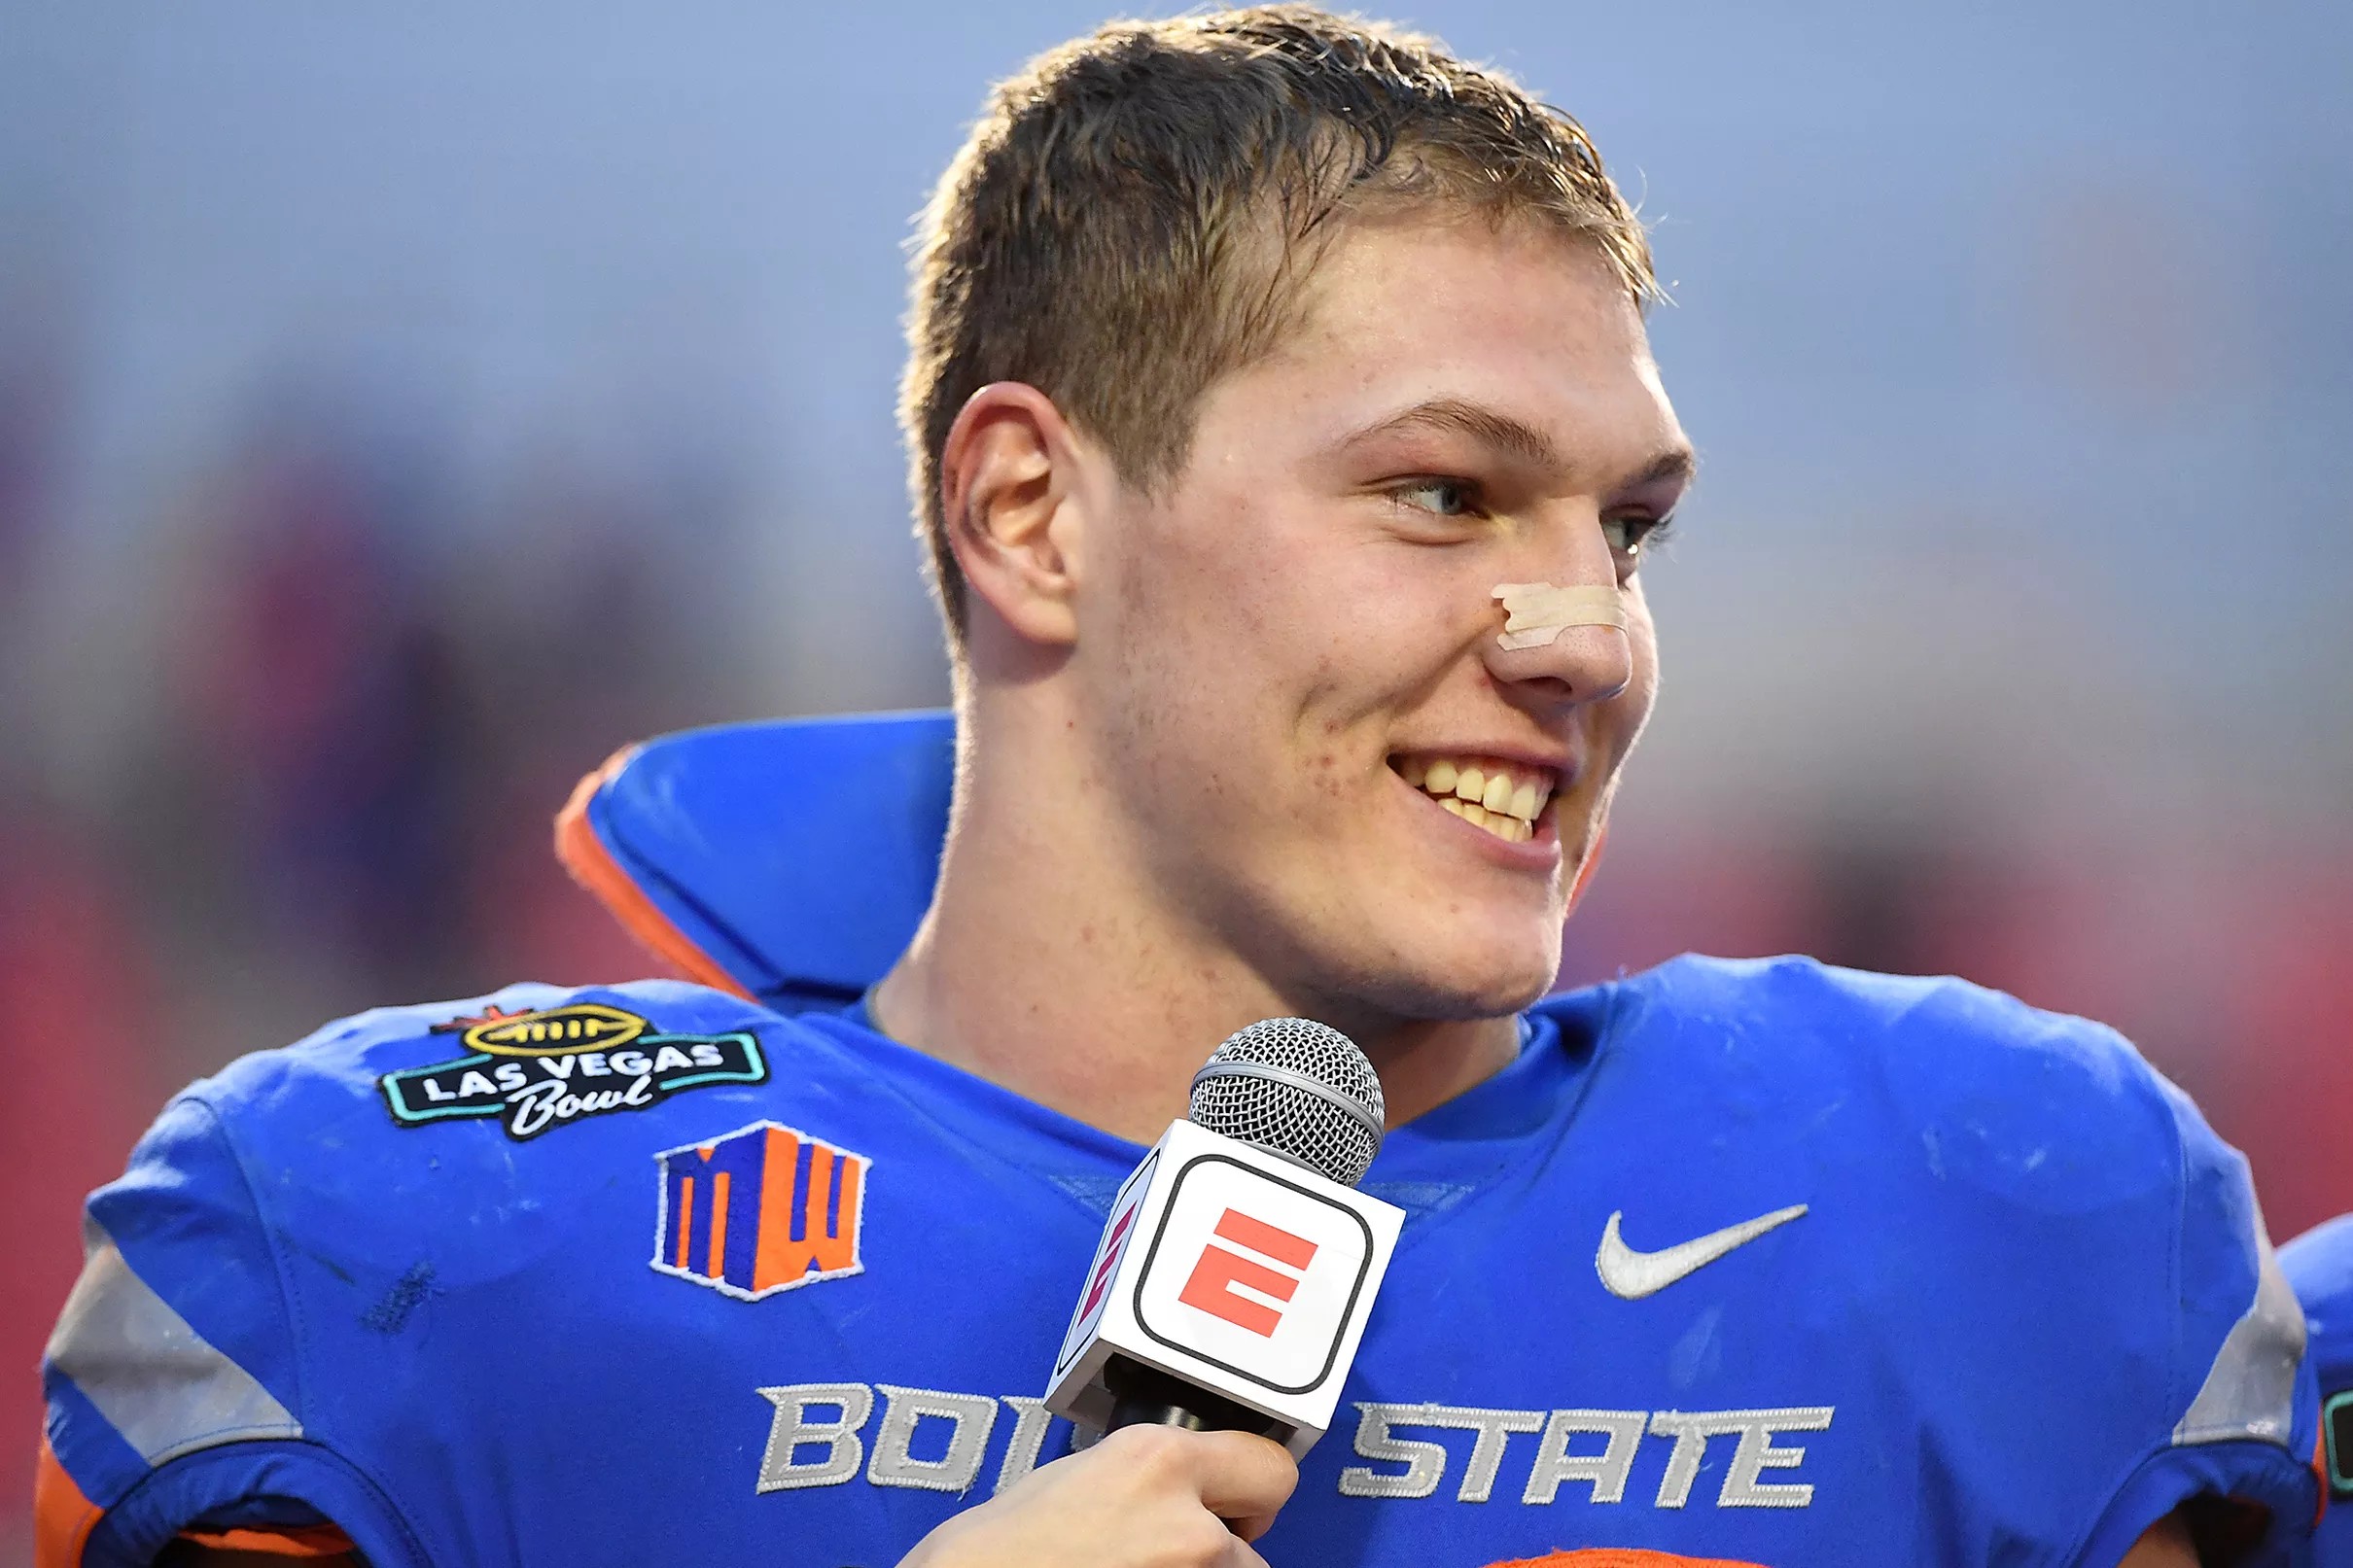 NFL Draft prospect to know Leighton Vander Esch, LB, Boise State